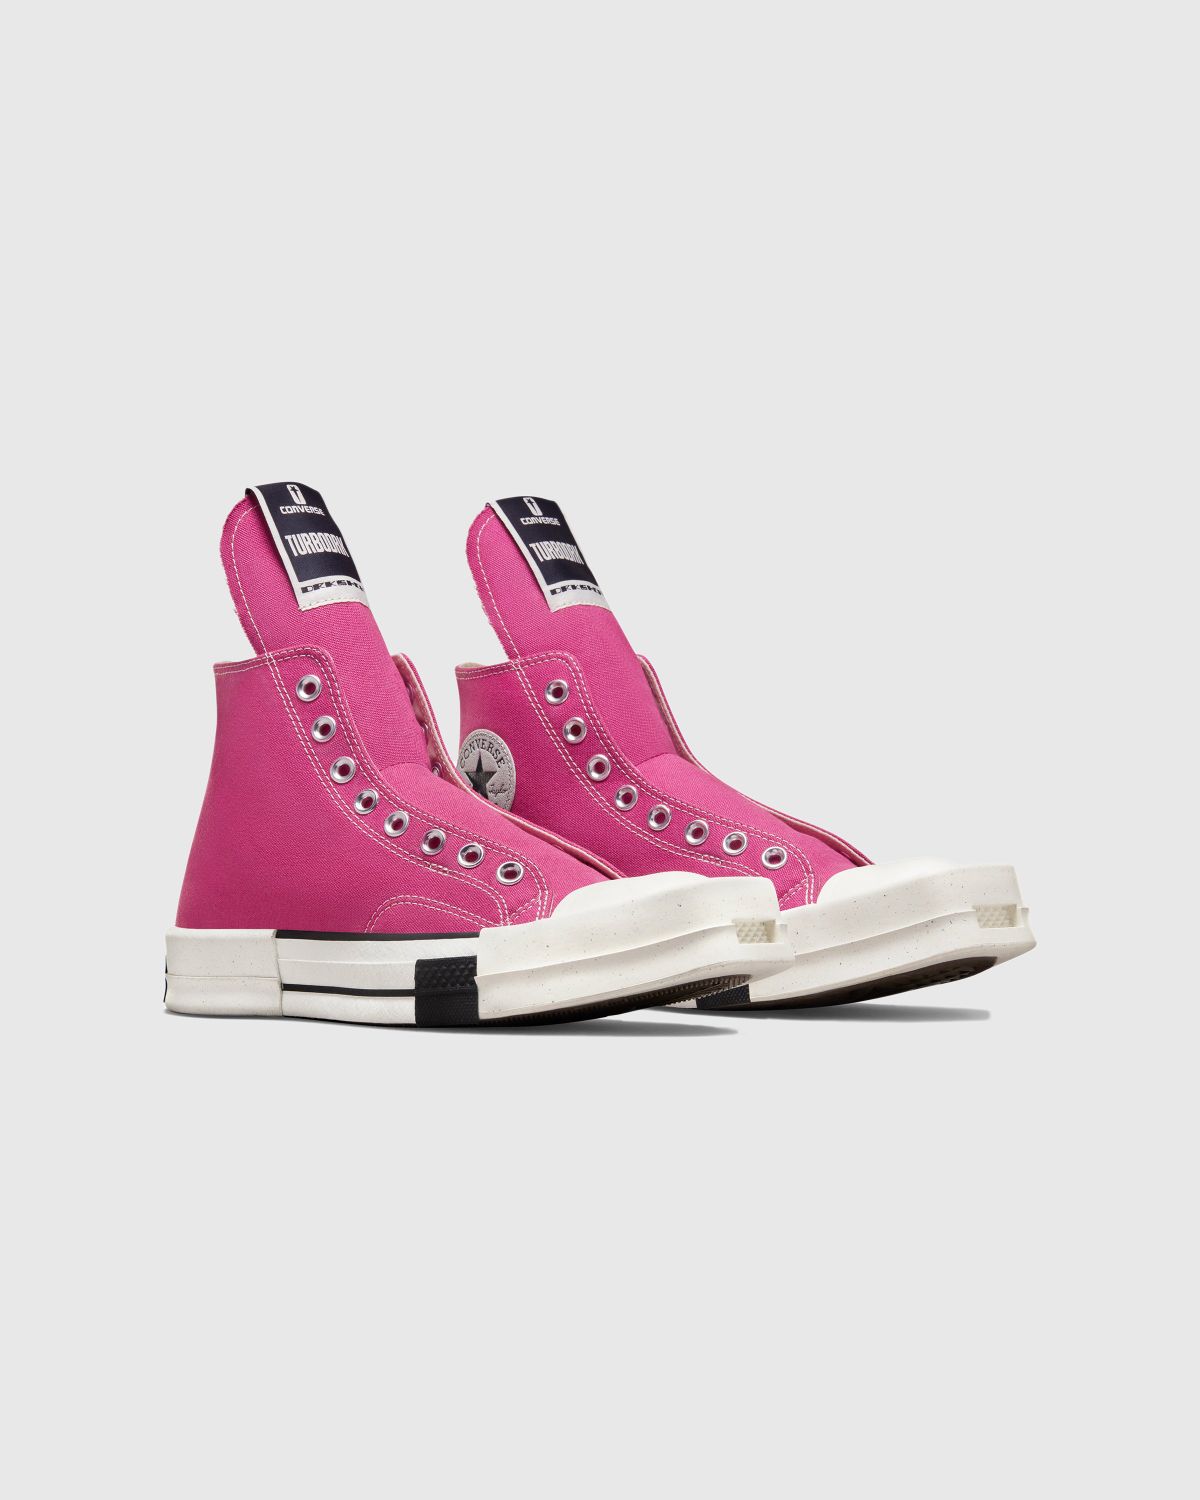 Converse x DRKSHDW – TURBODRK Chuck 70 Laceless Hi Pink - High Top Sneakers - Pink - Image 4